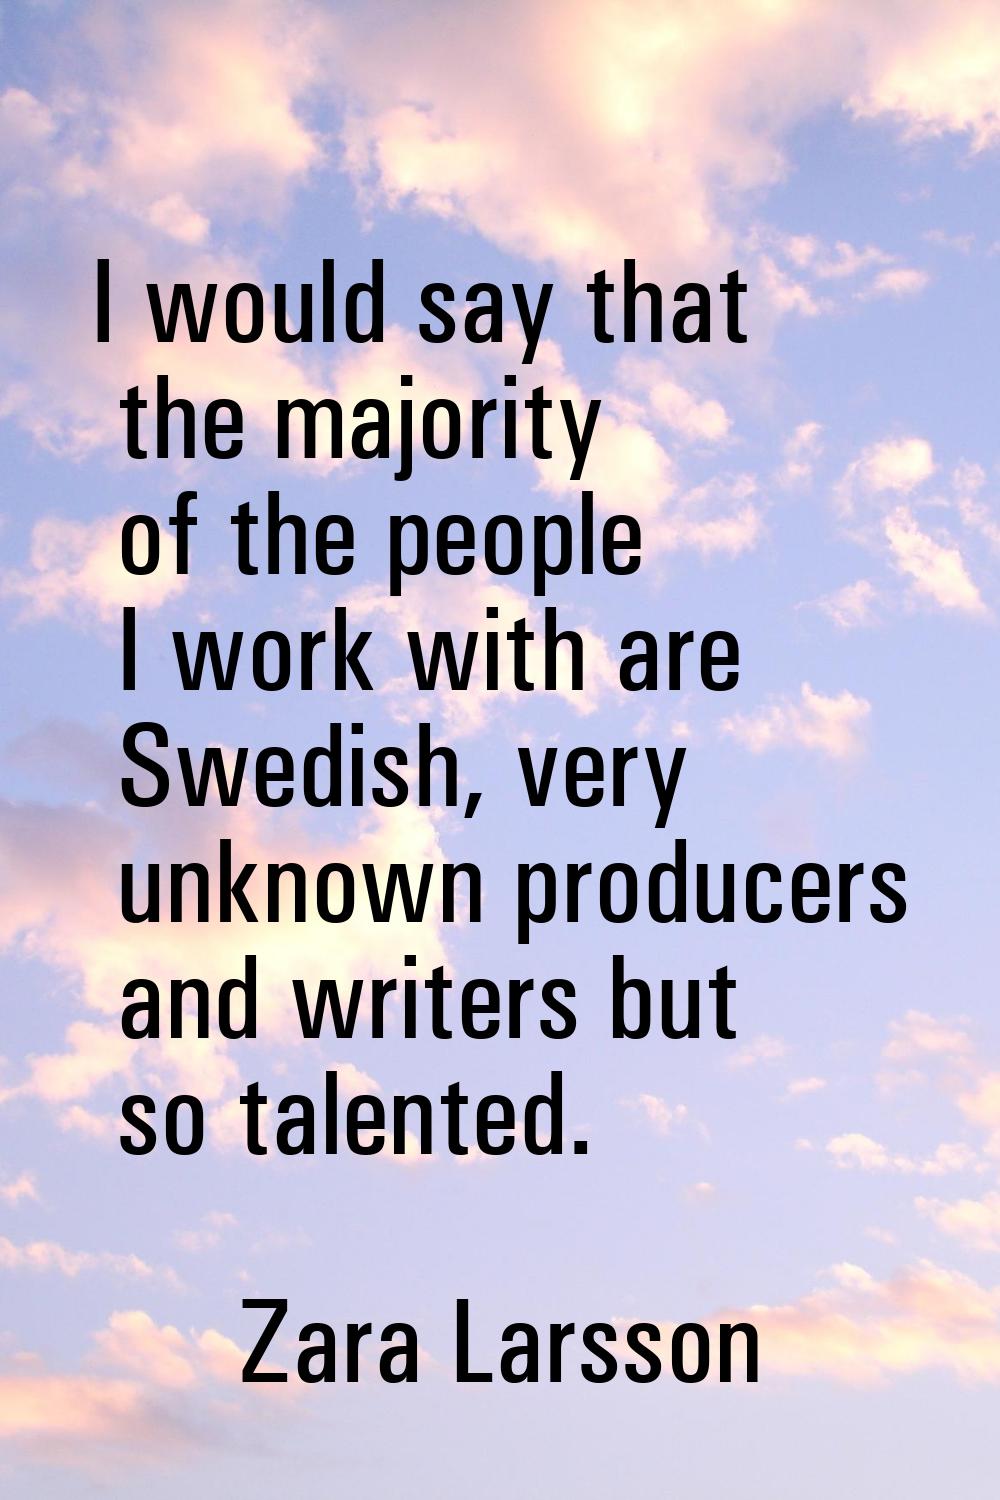 I would say that the majority of the people I work with are Swedish, very unknown producers and wri